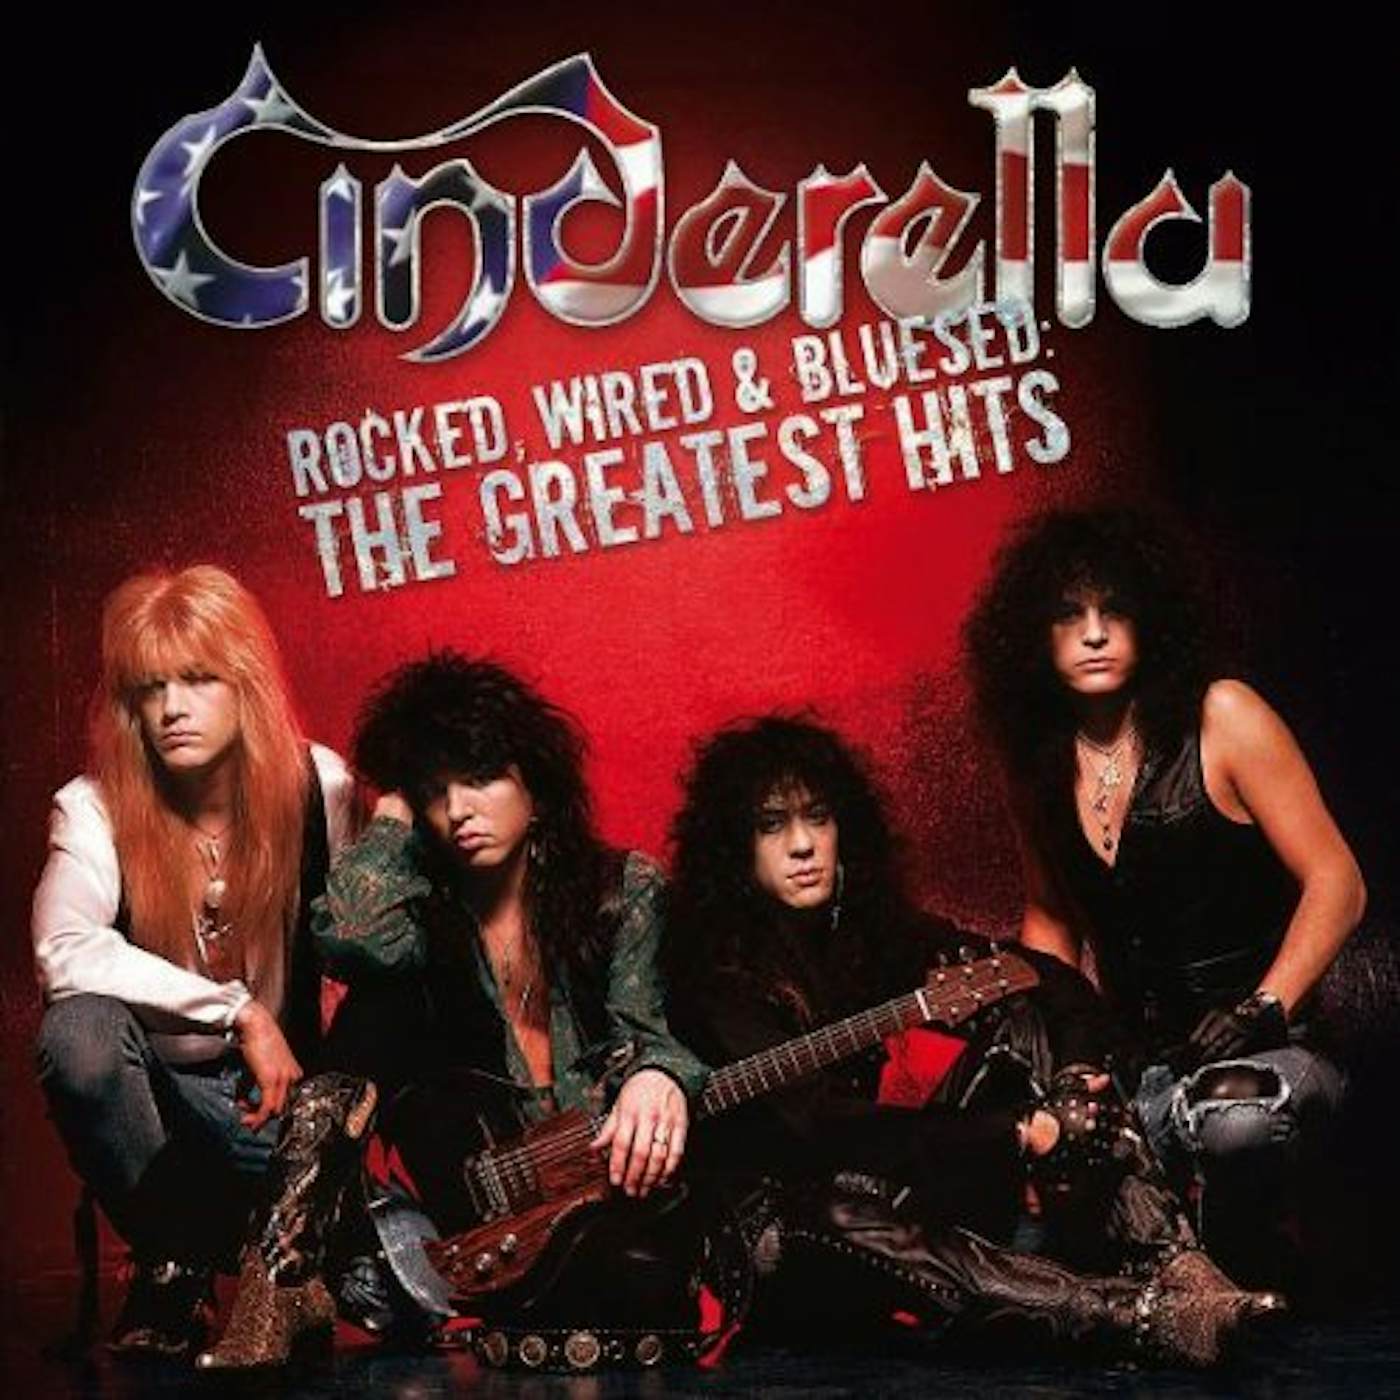 Cinderella ROCKED WIRED & BLUESED: THE GREATEST HITS CD